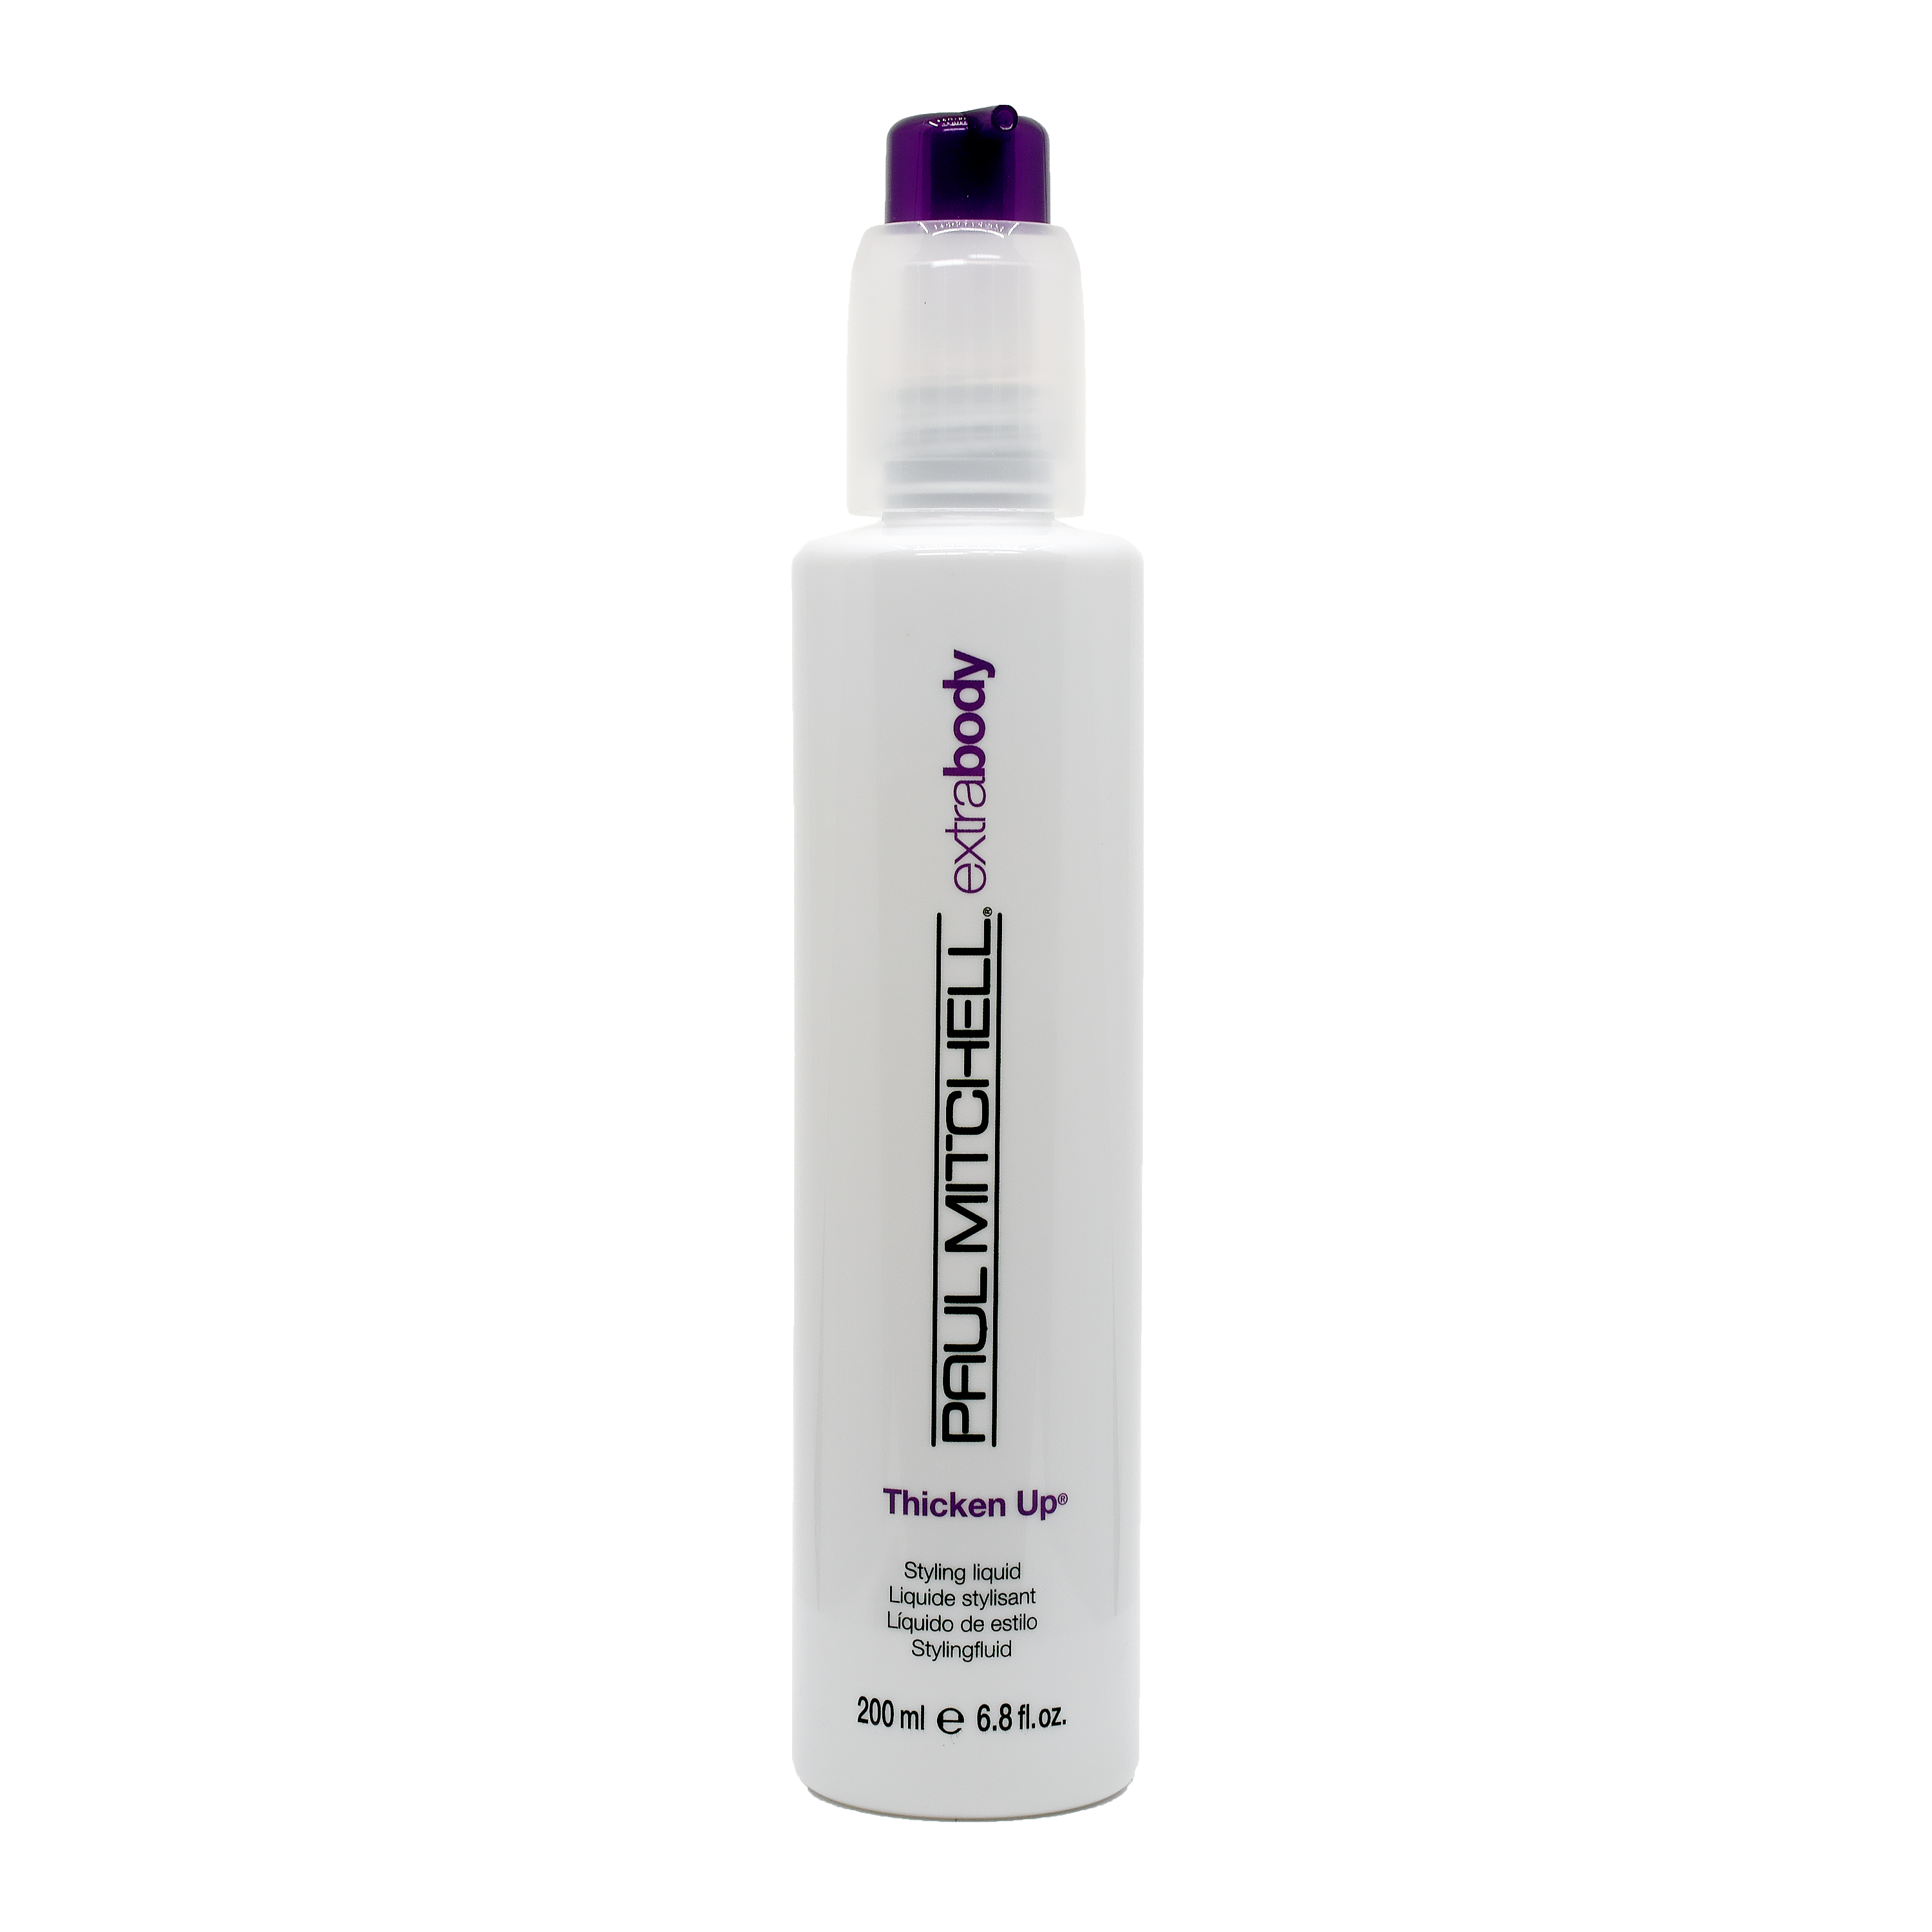 Paul Mitchell Extra Body Thicken Up Styling Liquid - 200ml